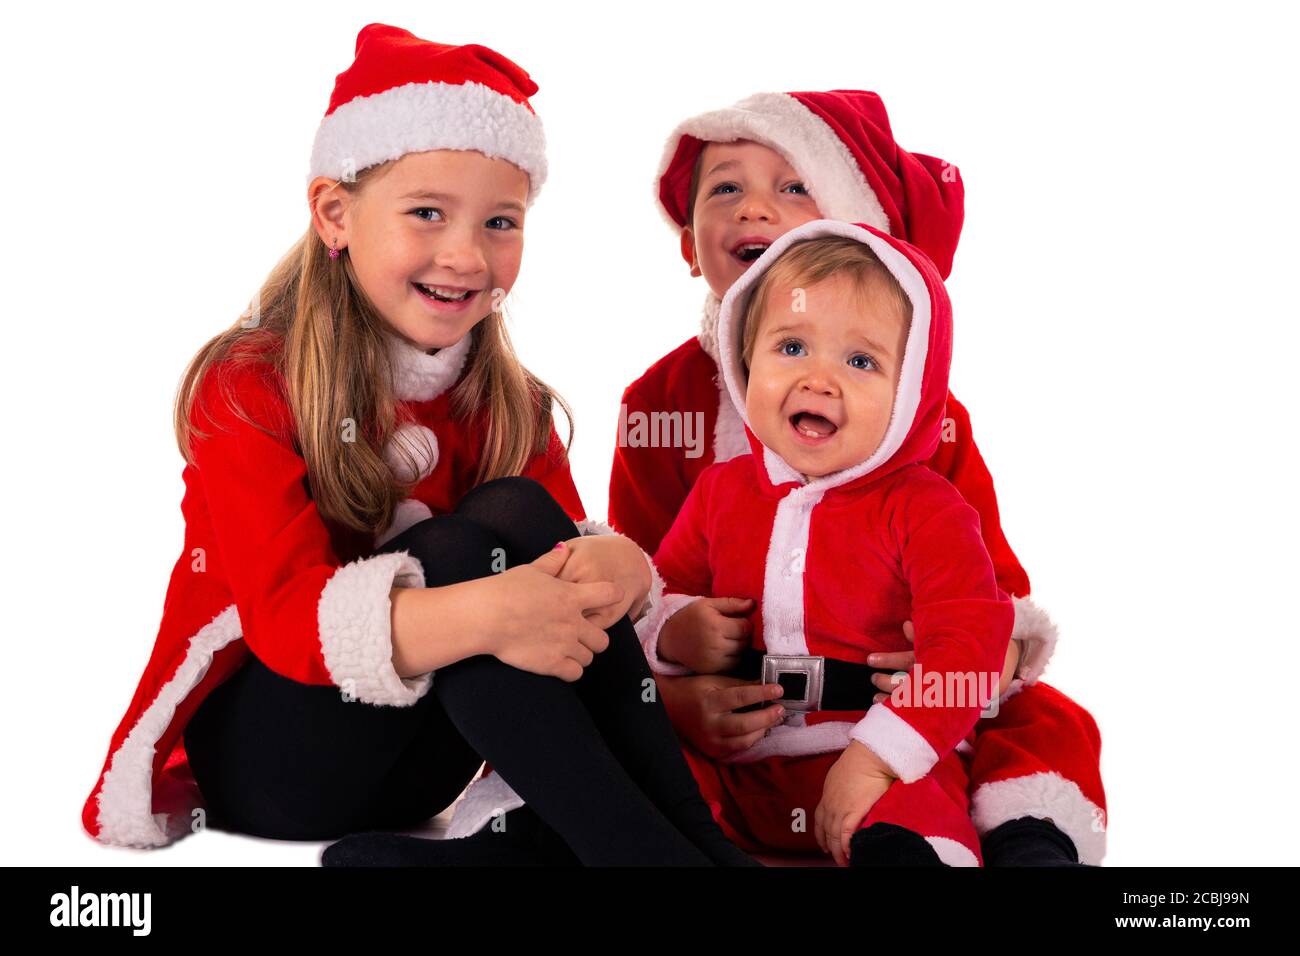 3 young children, 2 boys (1 year old - 4 year old) 1 girl (6 years old) sitting together on the floor wearing a Santa Claus costume smiling. isolated Stock Photo